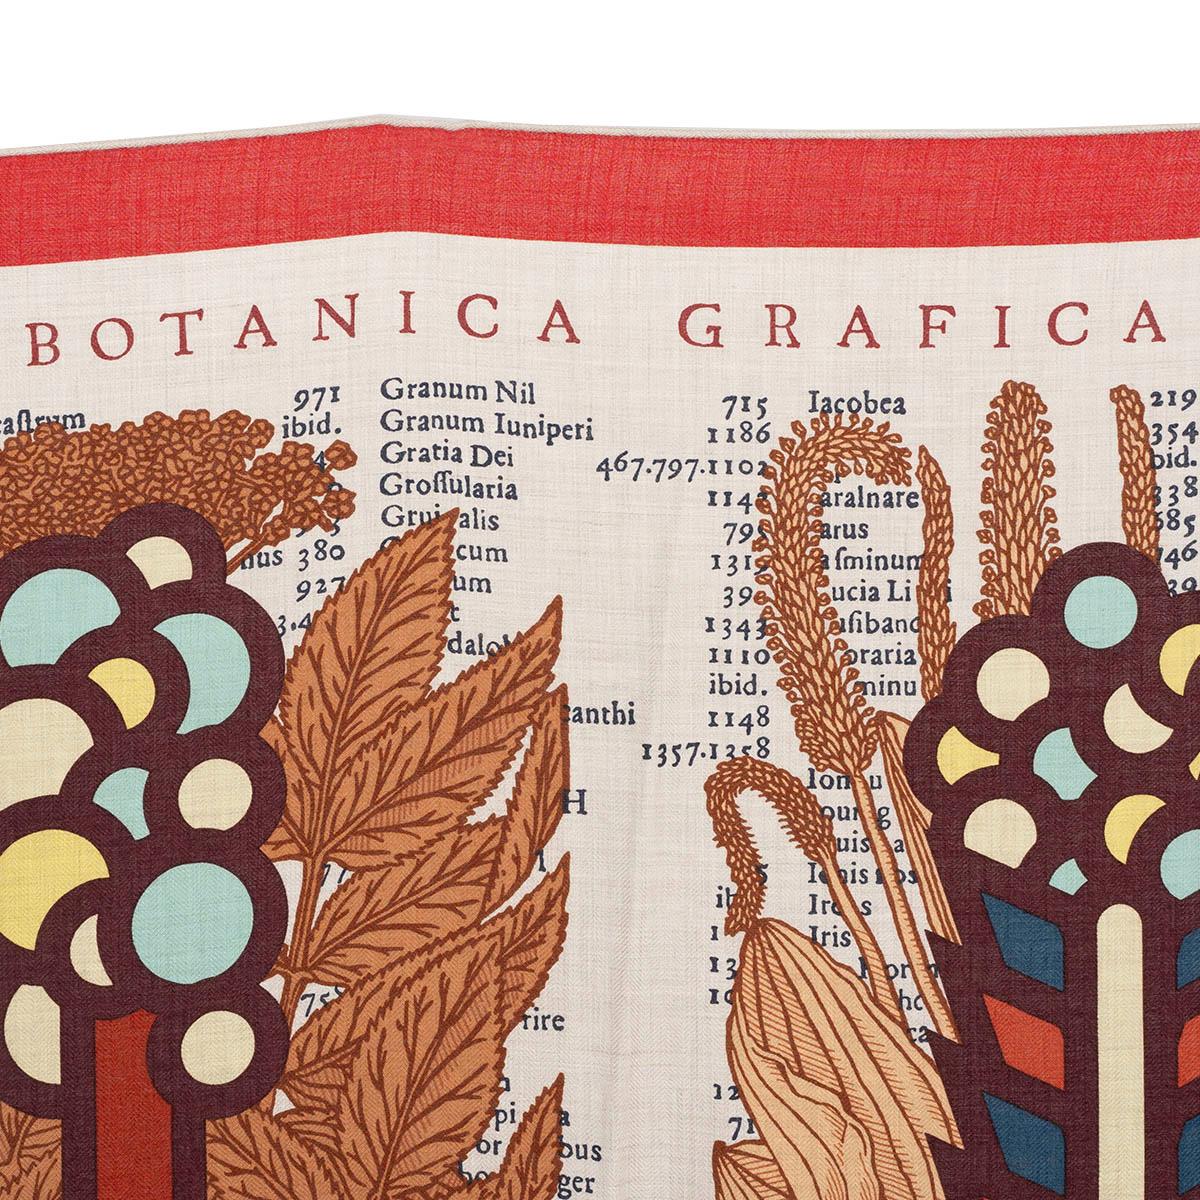 100% authentic Hermès Botanica Grafica 140 shawl in beige and red with details in burgundy, yellow, brick, brown and navy blue cashmere (70%) and silk (30%). Has been worn and is in excellent condition.

Measurements
Width	140cm